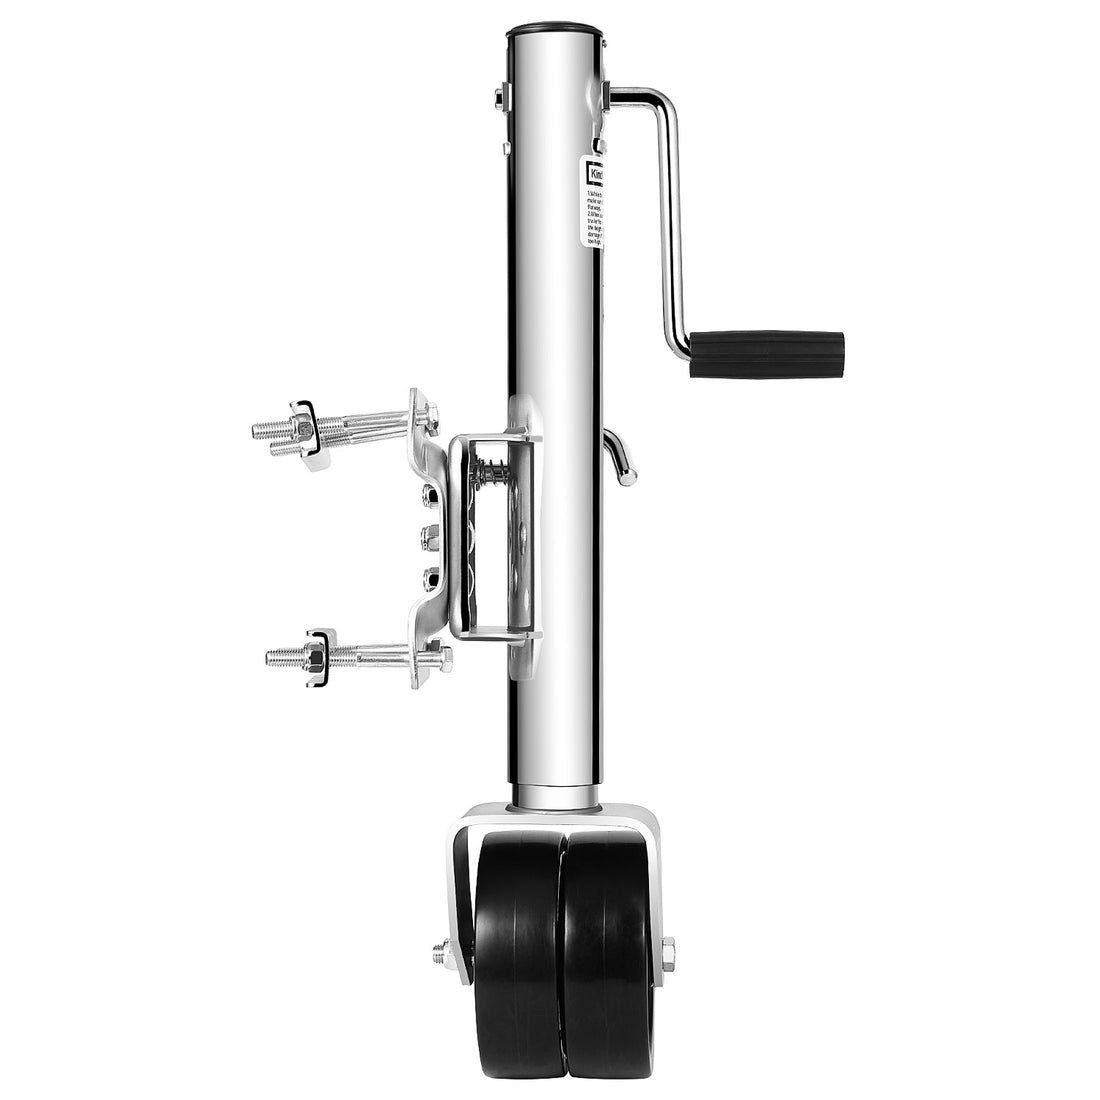 6-inch Dual Wheels Trailer Jack, 13" Lift Heavy Duty, 1500 lbs Trailer Jack for RV, Boat, Trailer and More